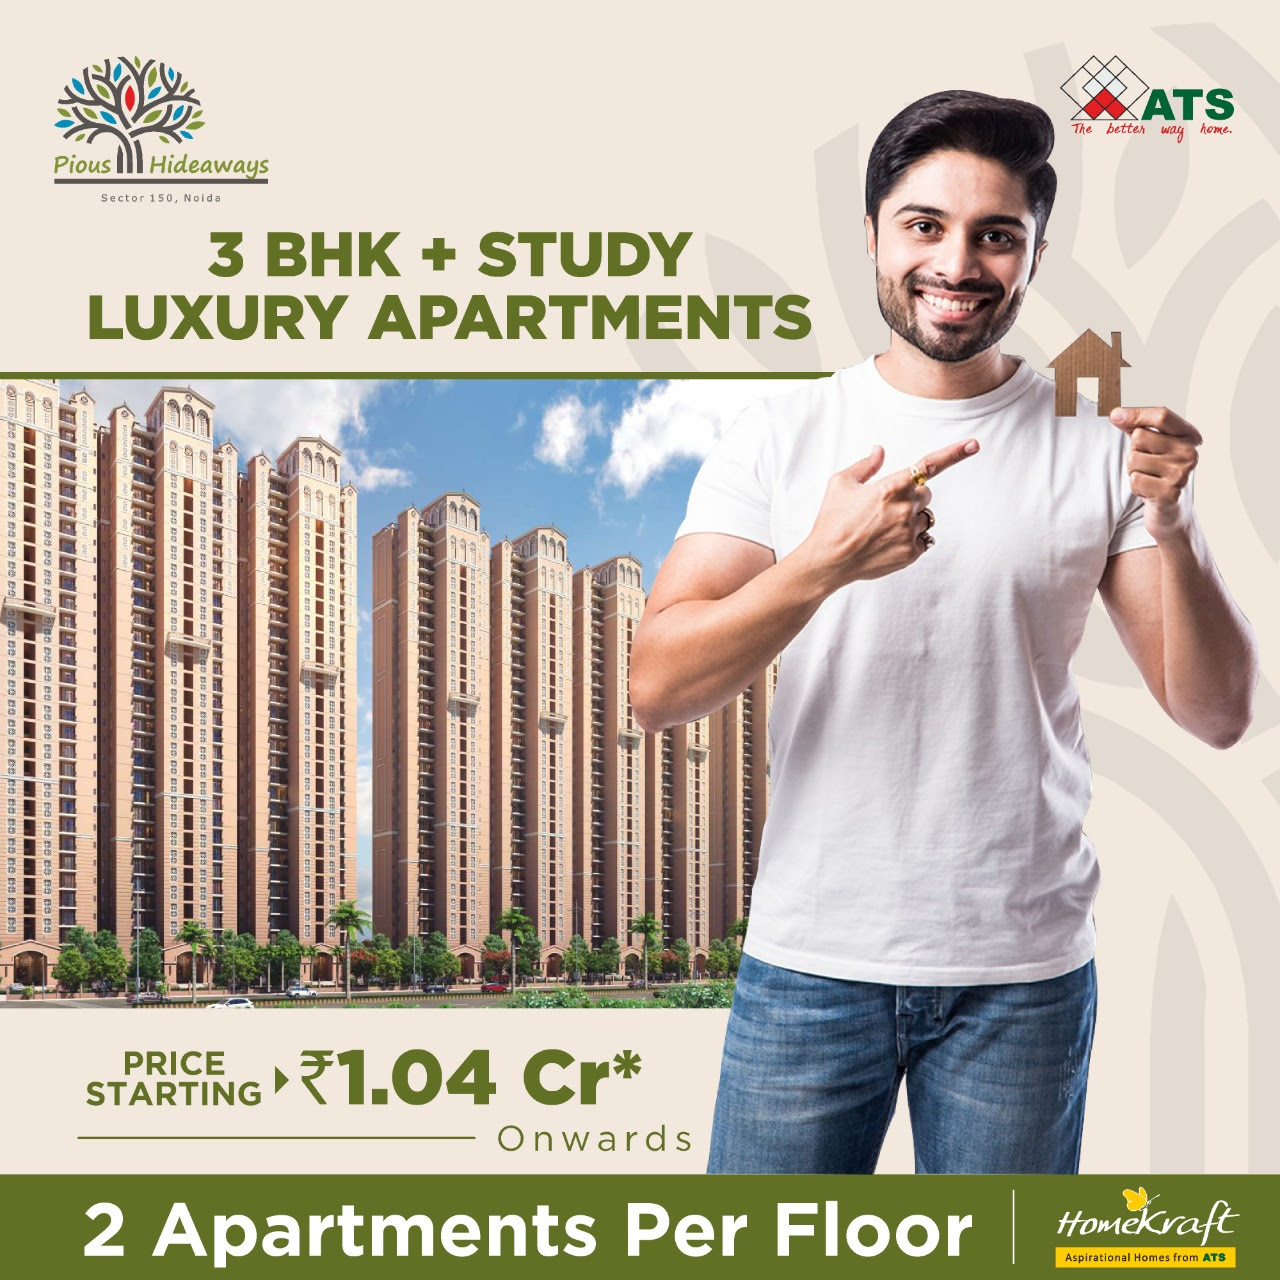 Book 3.5 BHK luxury aprtments price starting Rs 1.04 Cr at ATS Pious Hideaways, Noida Update